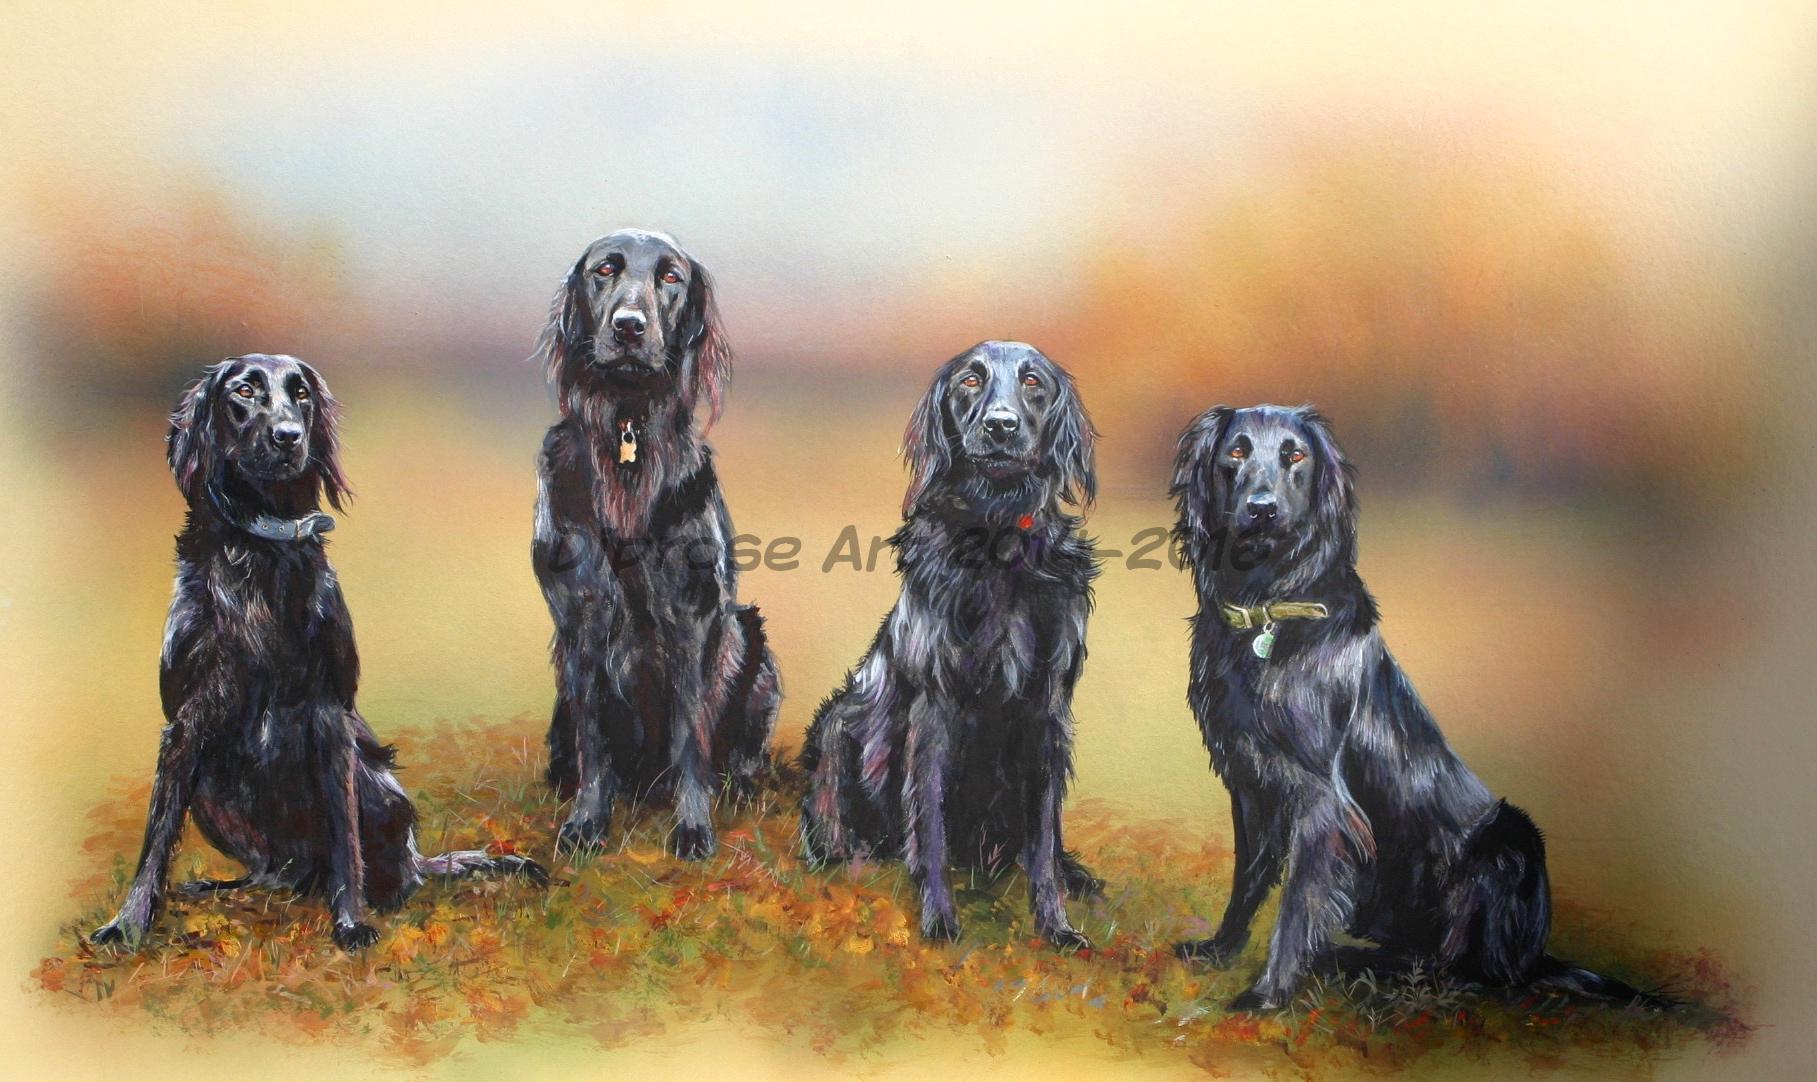 Acrylics on board - approx A1 - pet dog portraits - these Flatties are a family of dad, two brothers and sister.  I tried to depict them in Autumn colours to suggest they are out on the shoot.